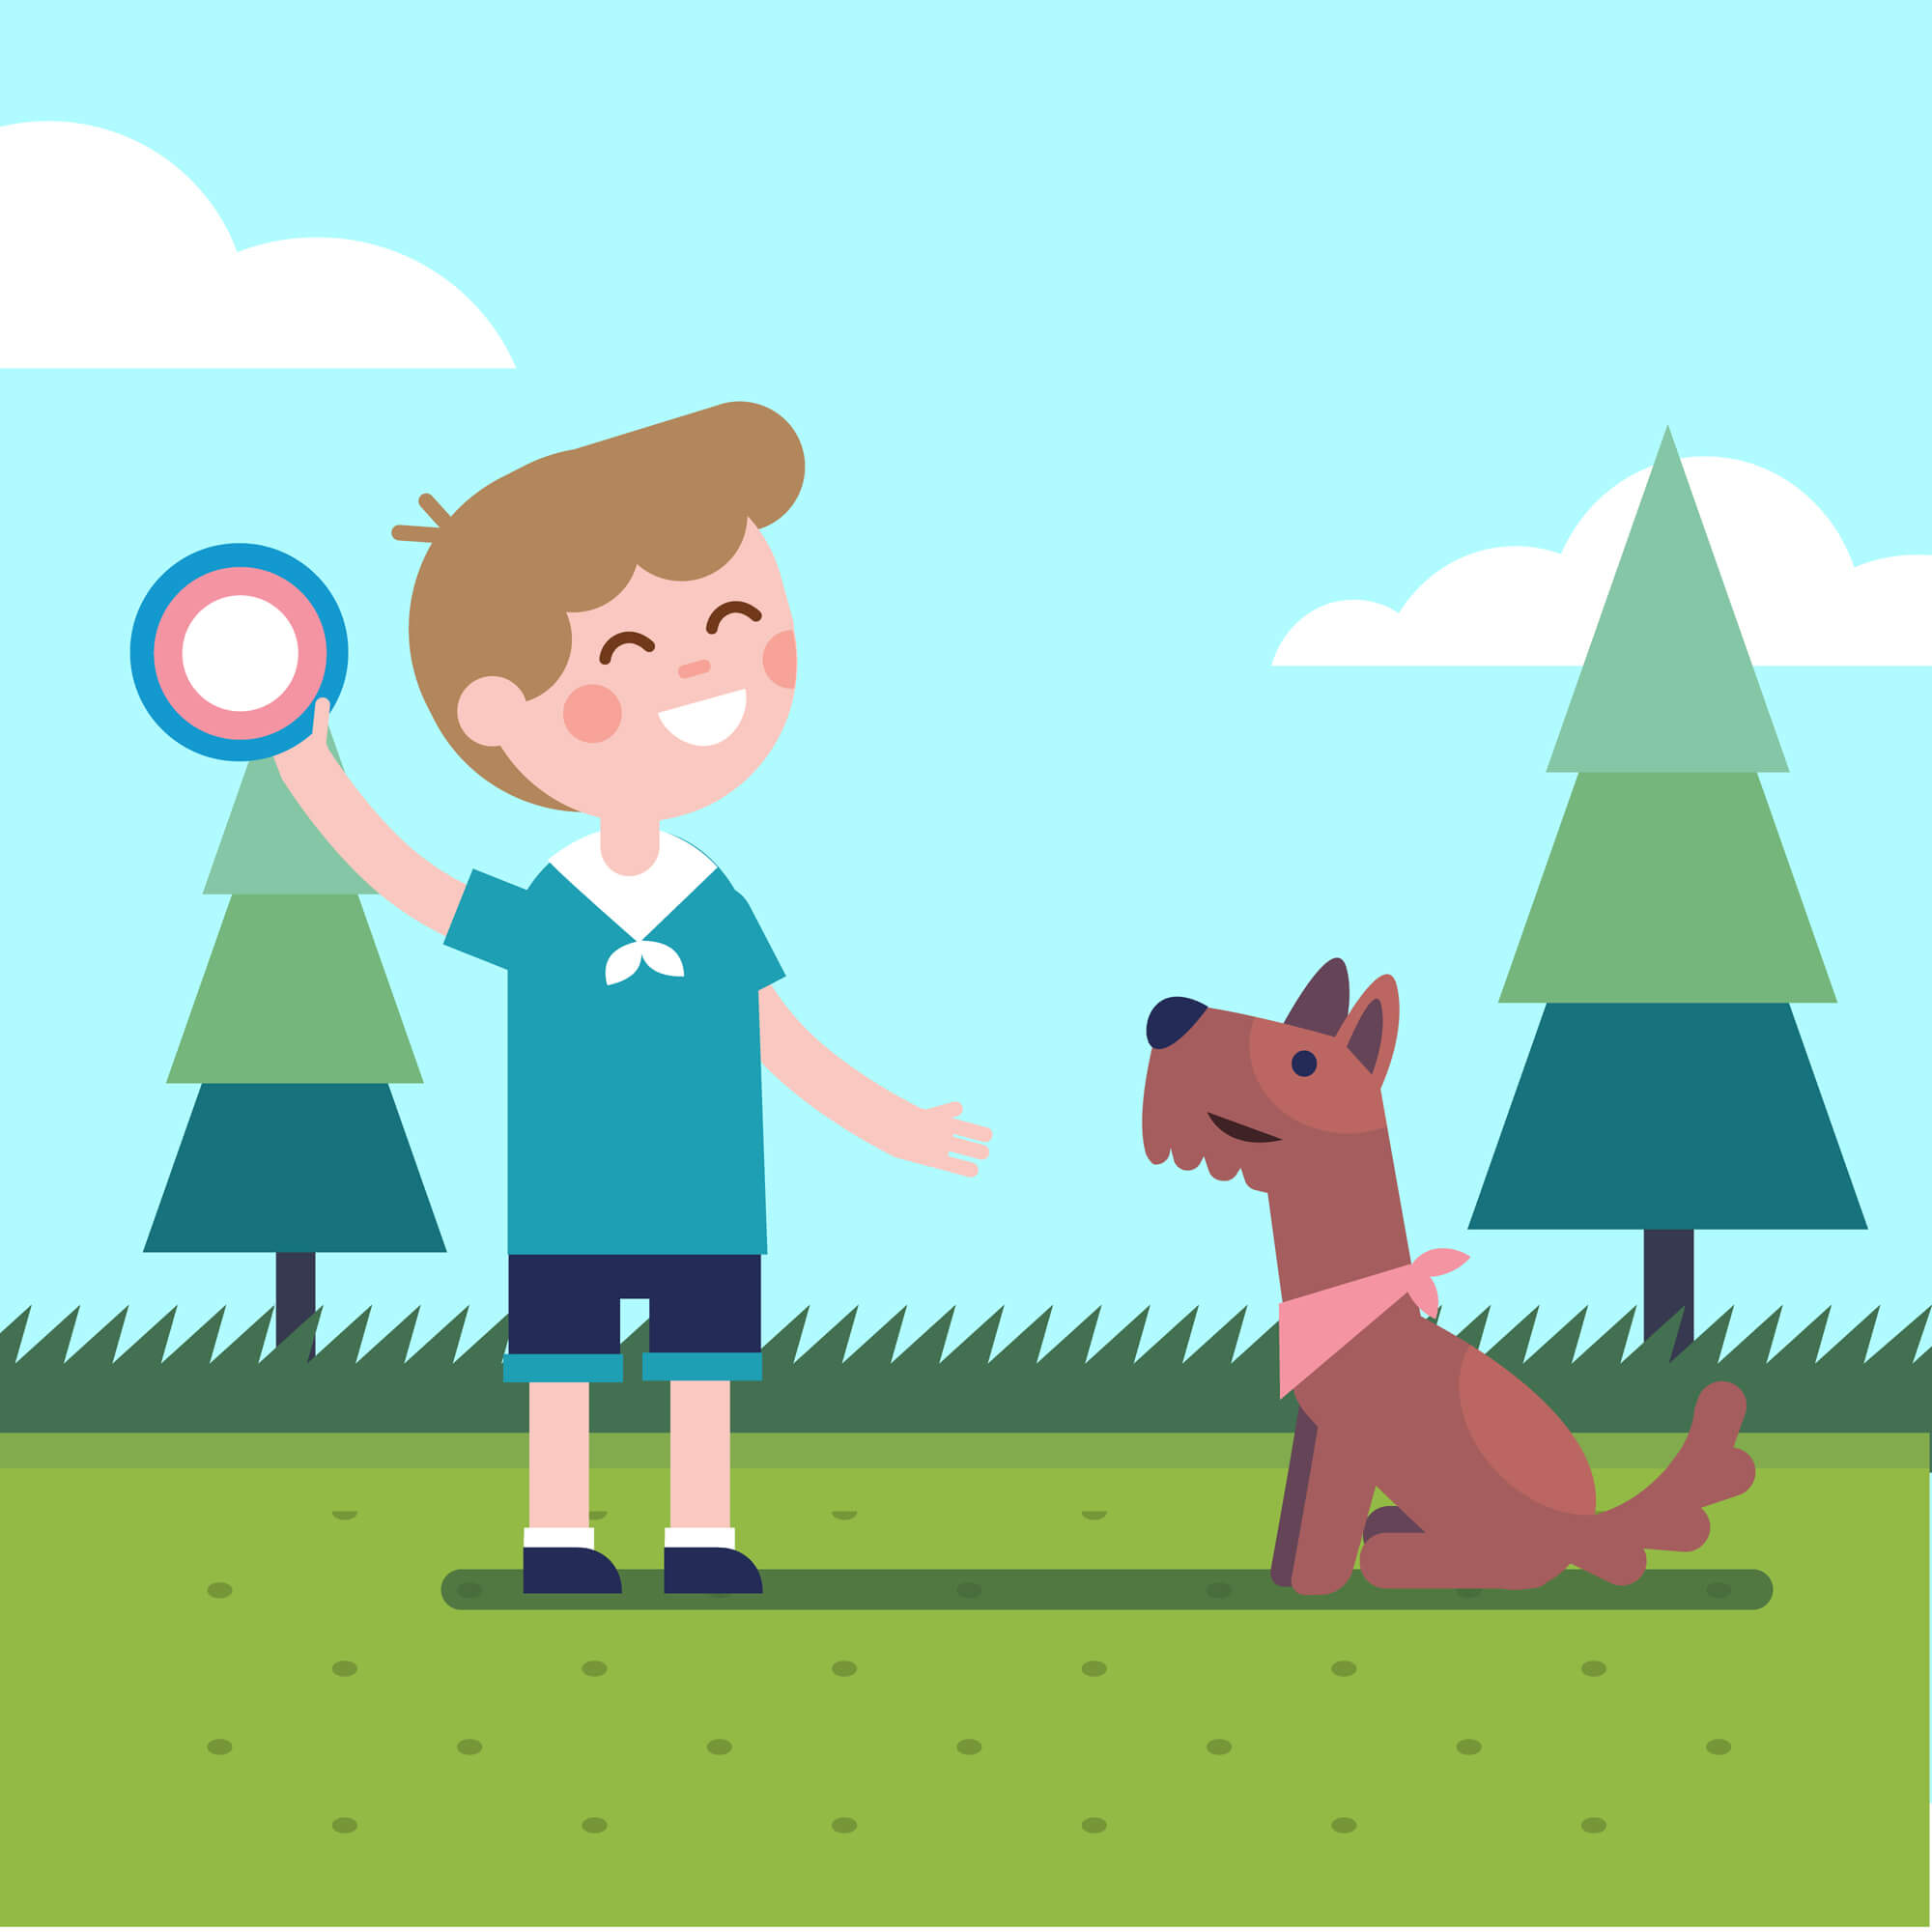 Boy kid playing flying disk trow catch with a dog